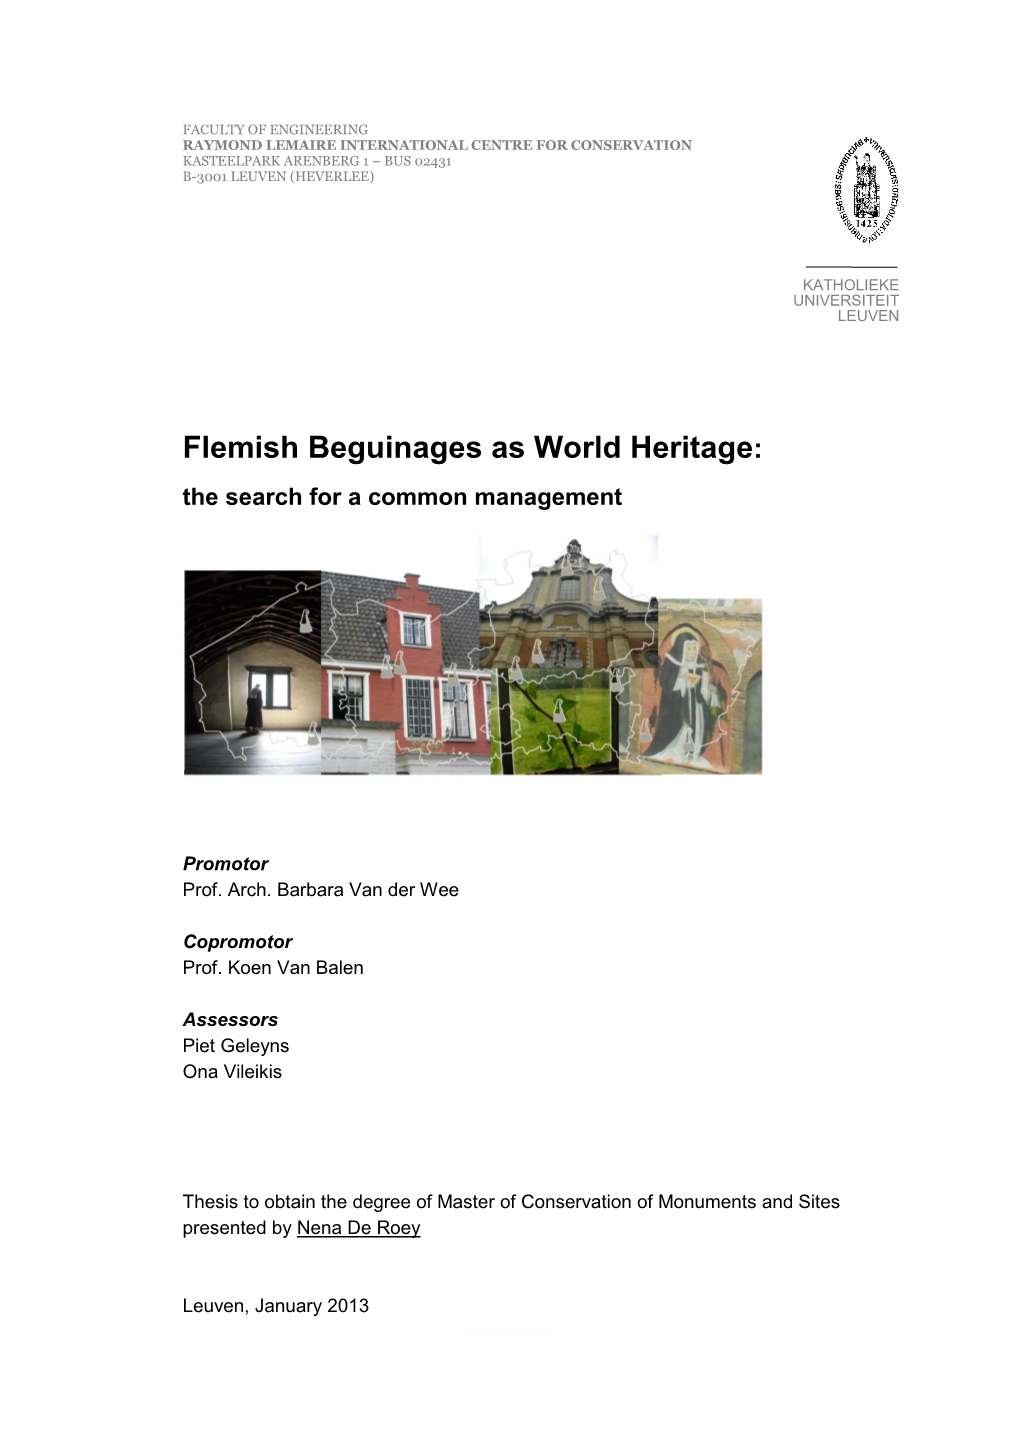 Flemish Beguinages As World Heritage: the Search for a Common Management